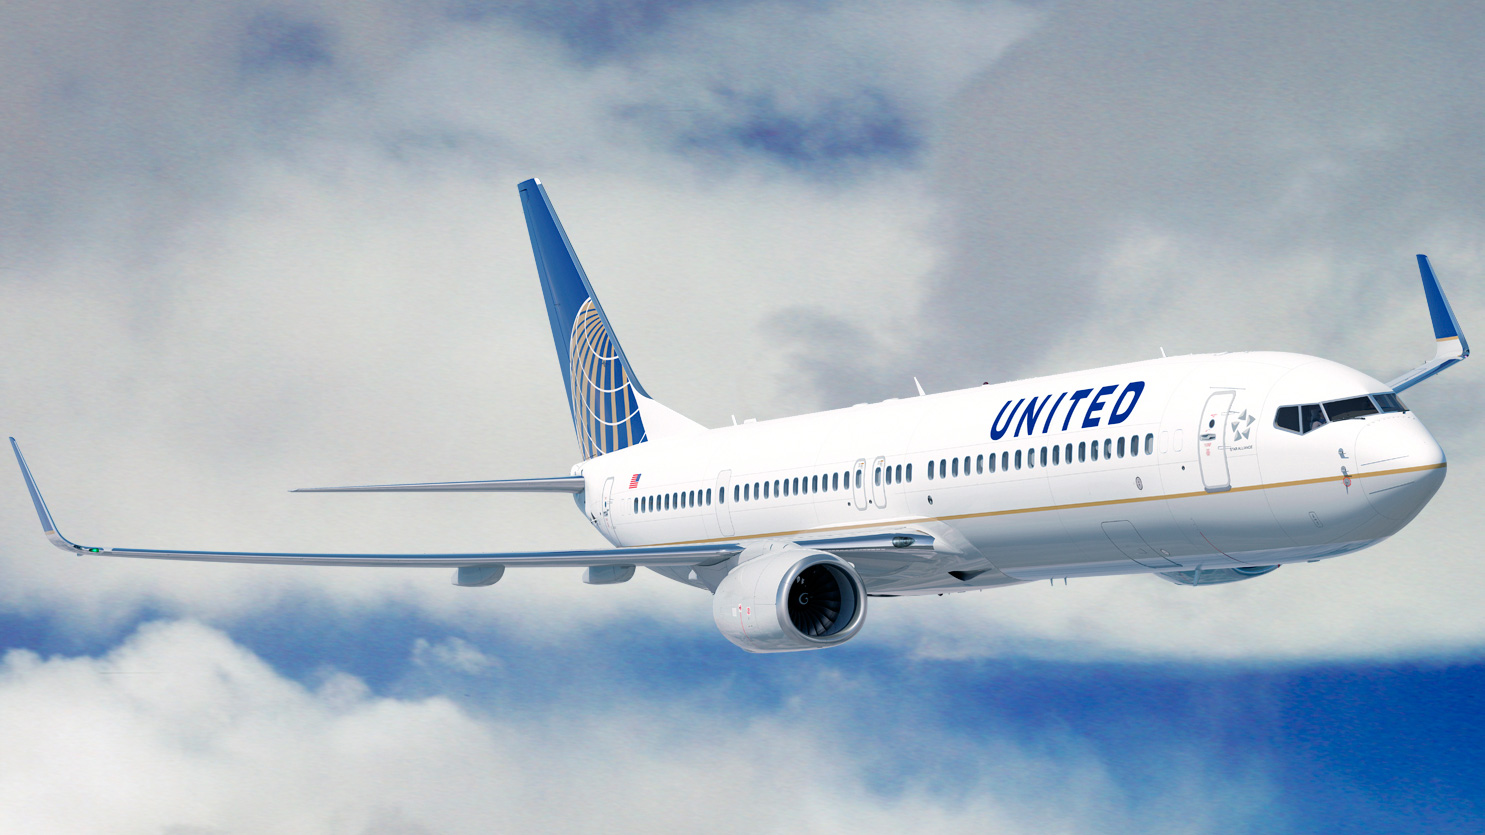 United Airlines Flight Makes Emergency Landing in Ireland After Laptop Drama Unfolds at 30,000 Feet